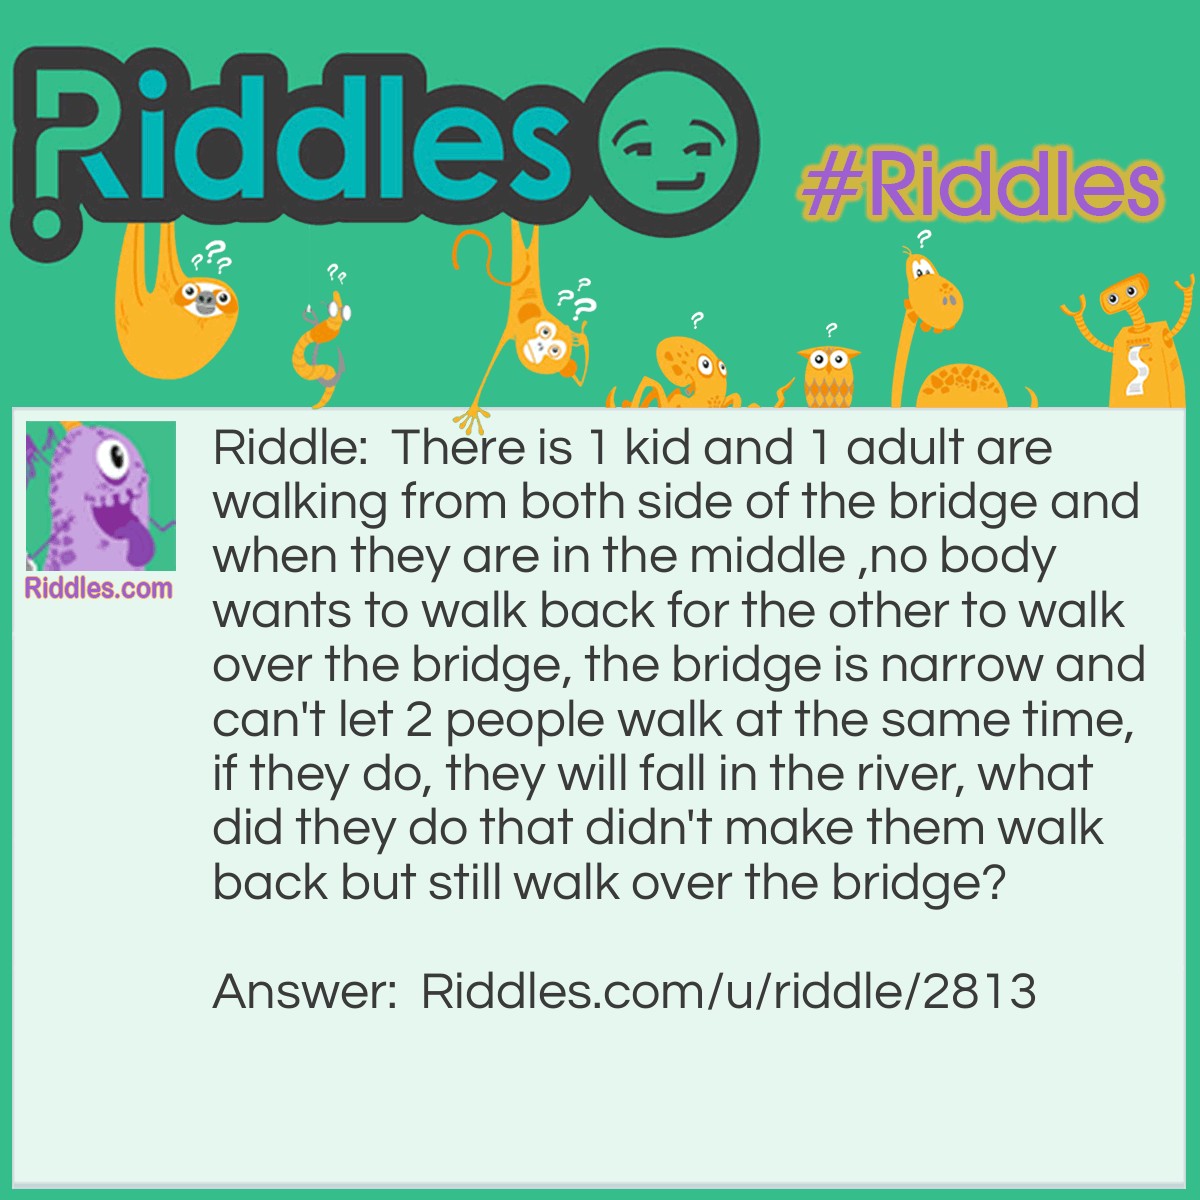 Riddle: There is 1 kid and 1 adult are walking from both side of the bridge and when they are in the middle ,no body wants to walk back for the other to walk over the bridge, the bridge is narrow and can't let 2 people walk at the same time, if they do, they will fall in the river, what did they do that didn't make them walk back but still walk over the bridge? Answer: The adult can pick the kid up and turn around then drop the kid down then both can keep continue walking where they wanna go.